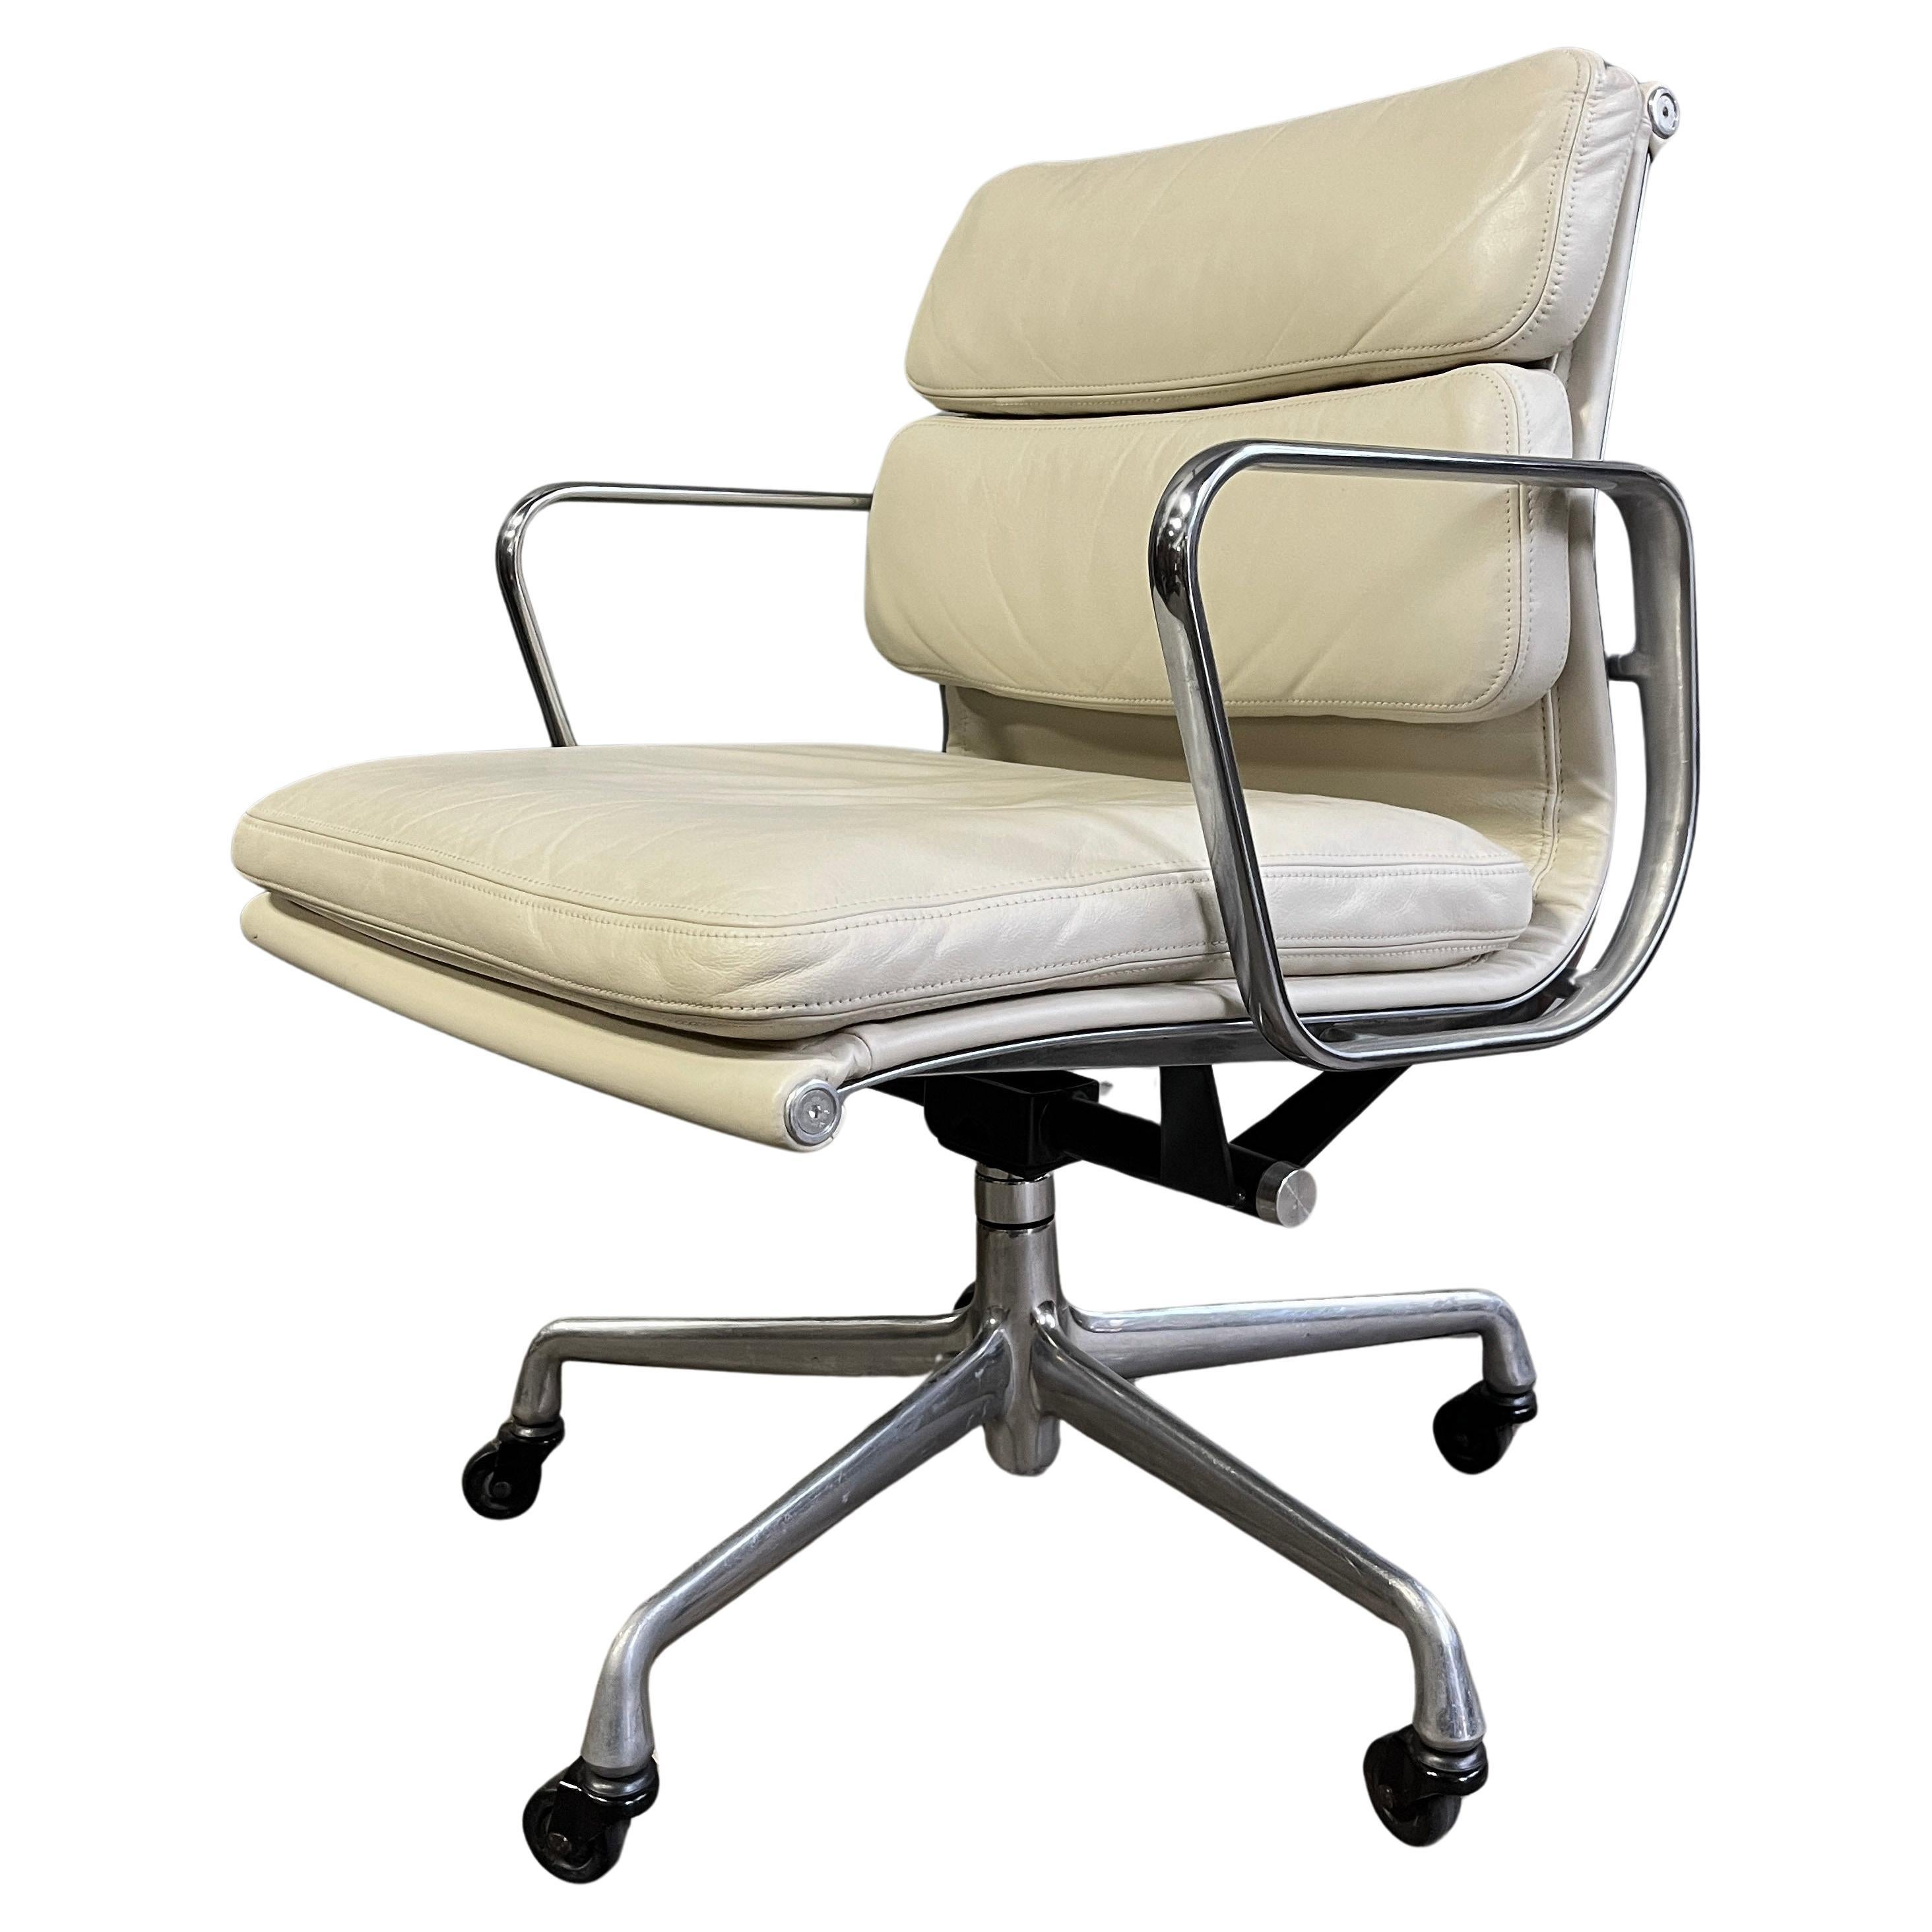 For your consideration are these authentic Eames for Herman Miller vintage soft pad chair in white leather. Adjustable tilt and height with manual lift. This authentic vintage example are icons of Mid-Century Modern design. The chair part of the